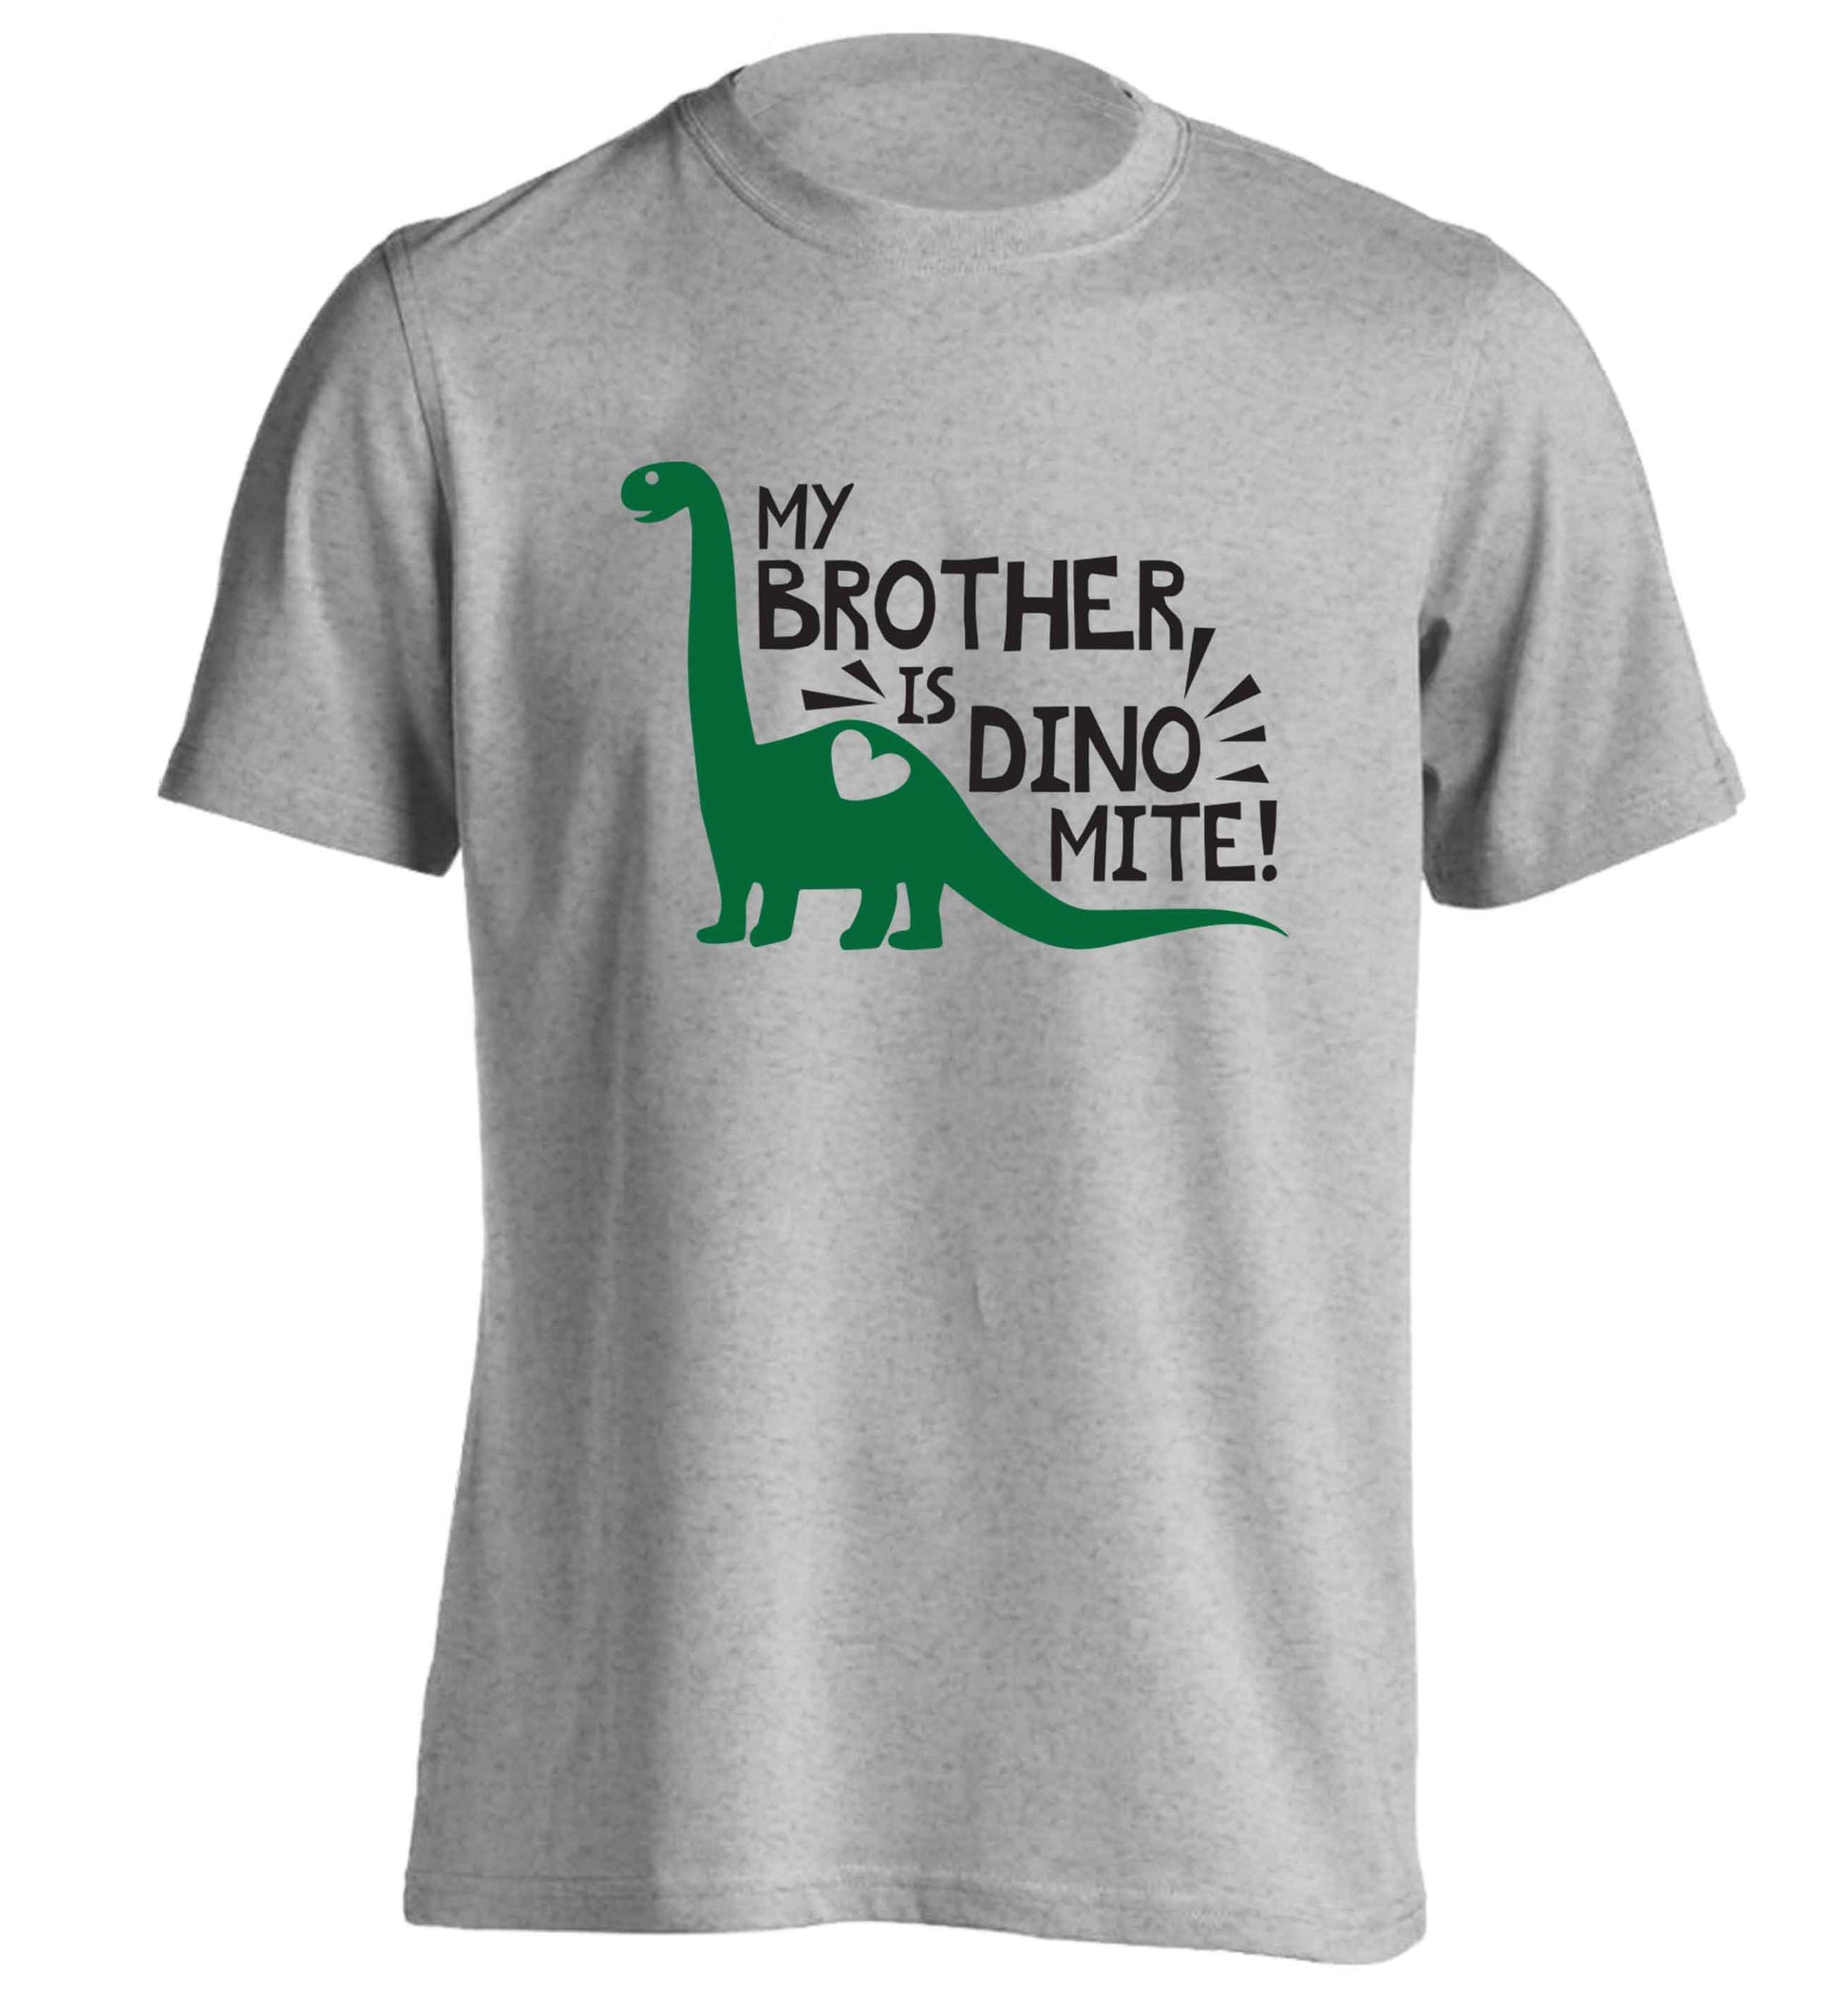 My brother is dinomite! adults unisex grey Tshirt 2XL